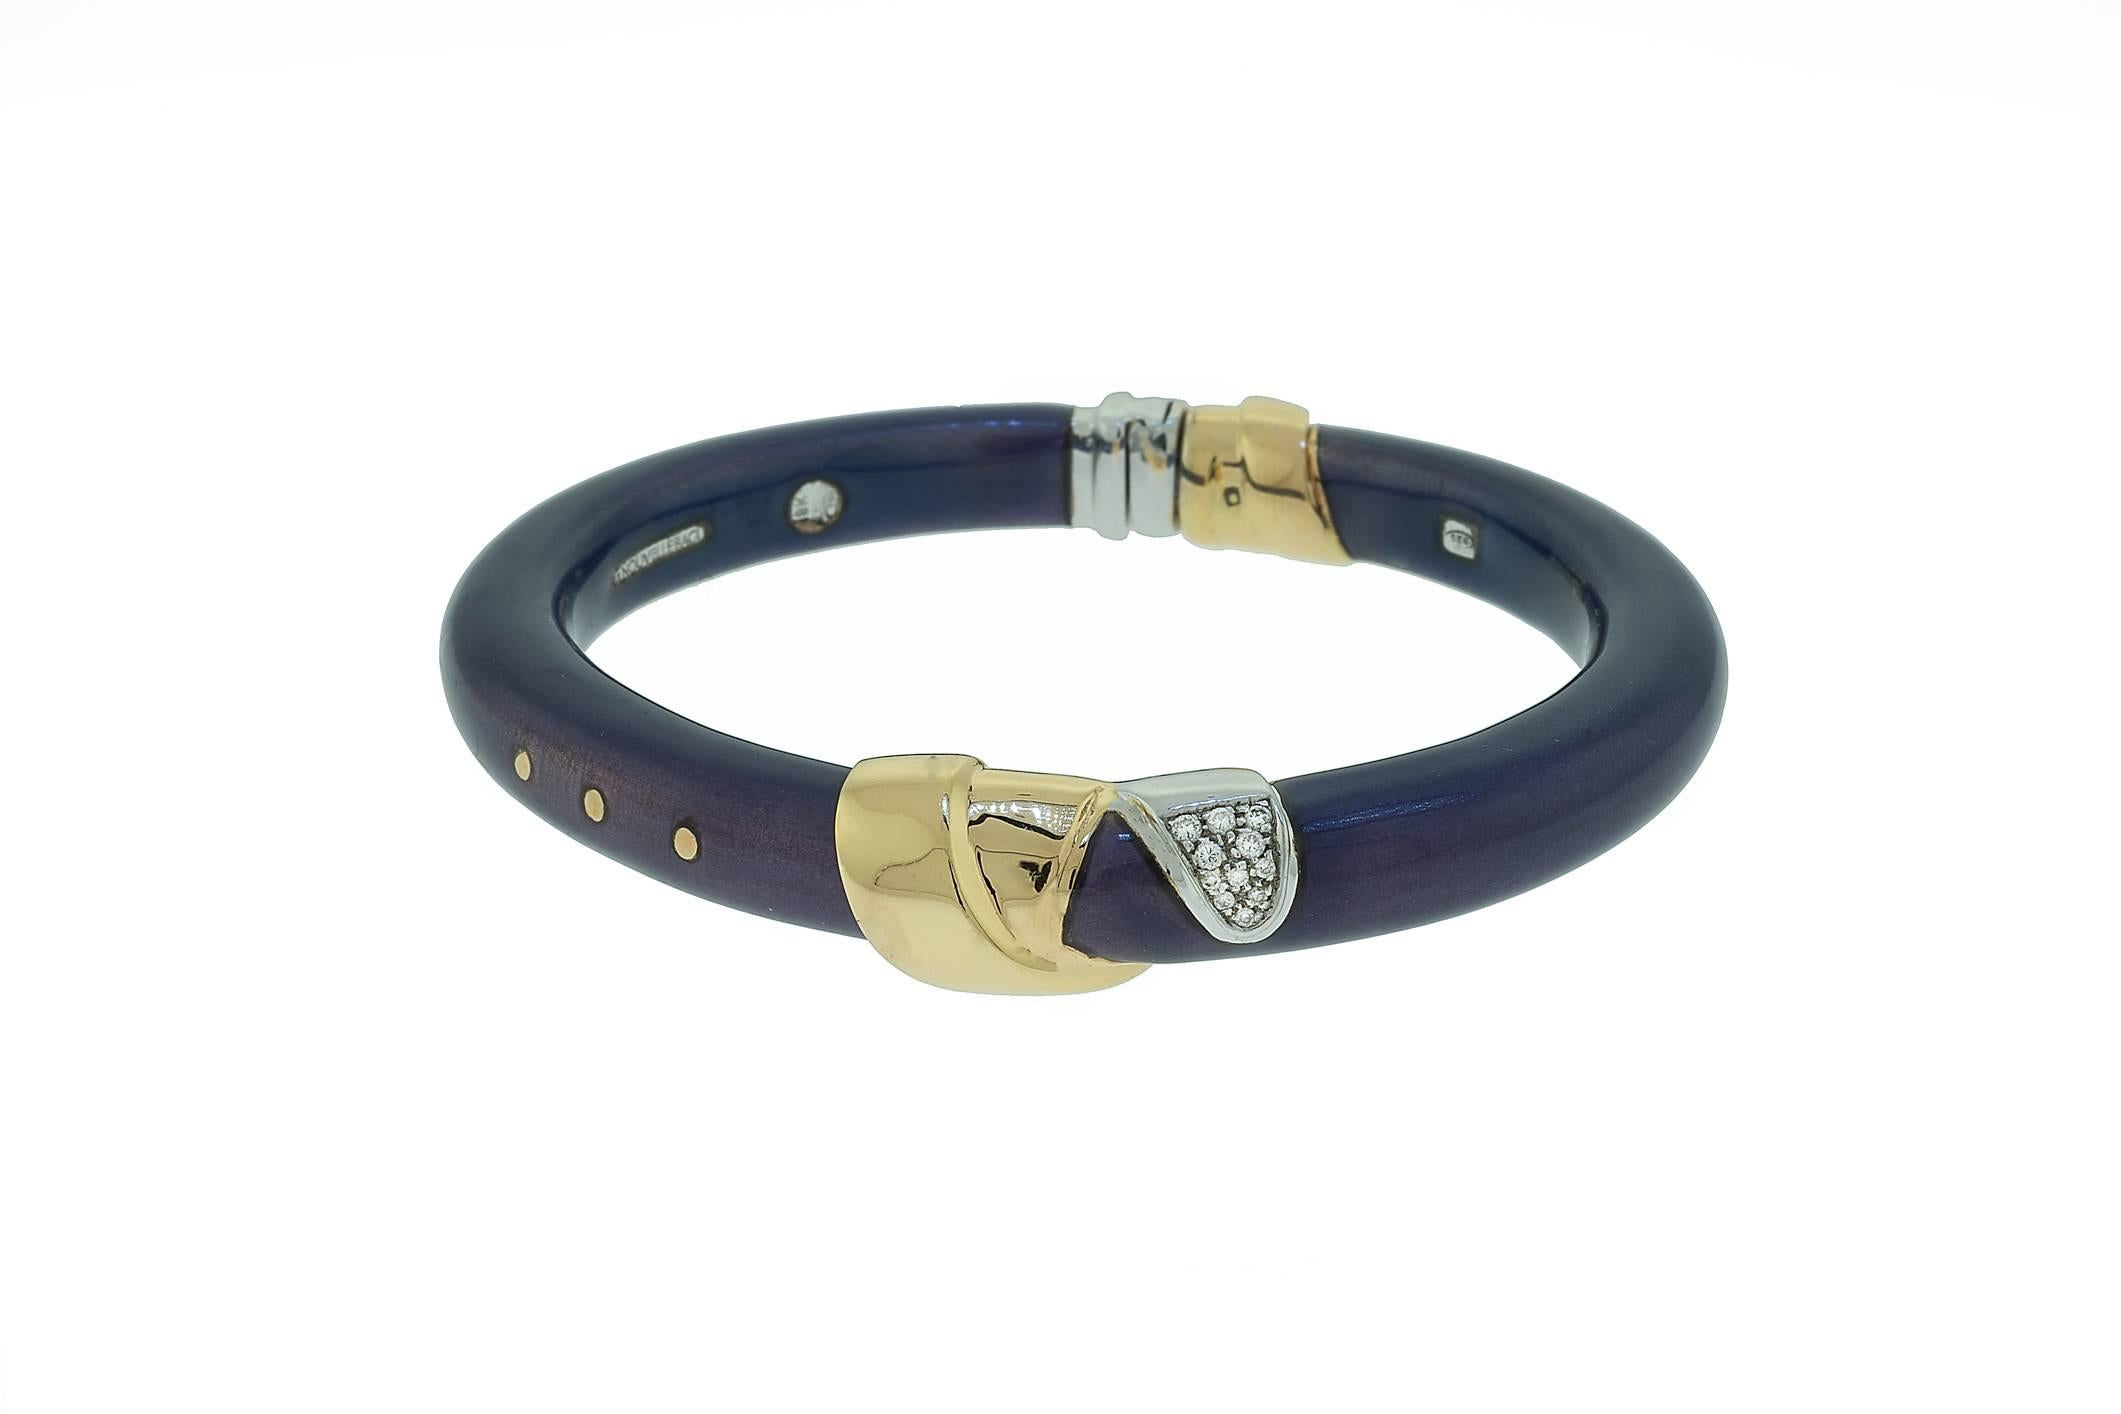 Enamel and 18K gold bracelet with diamond accent.